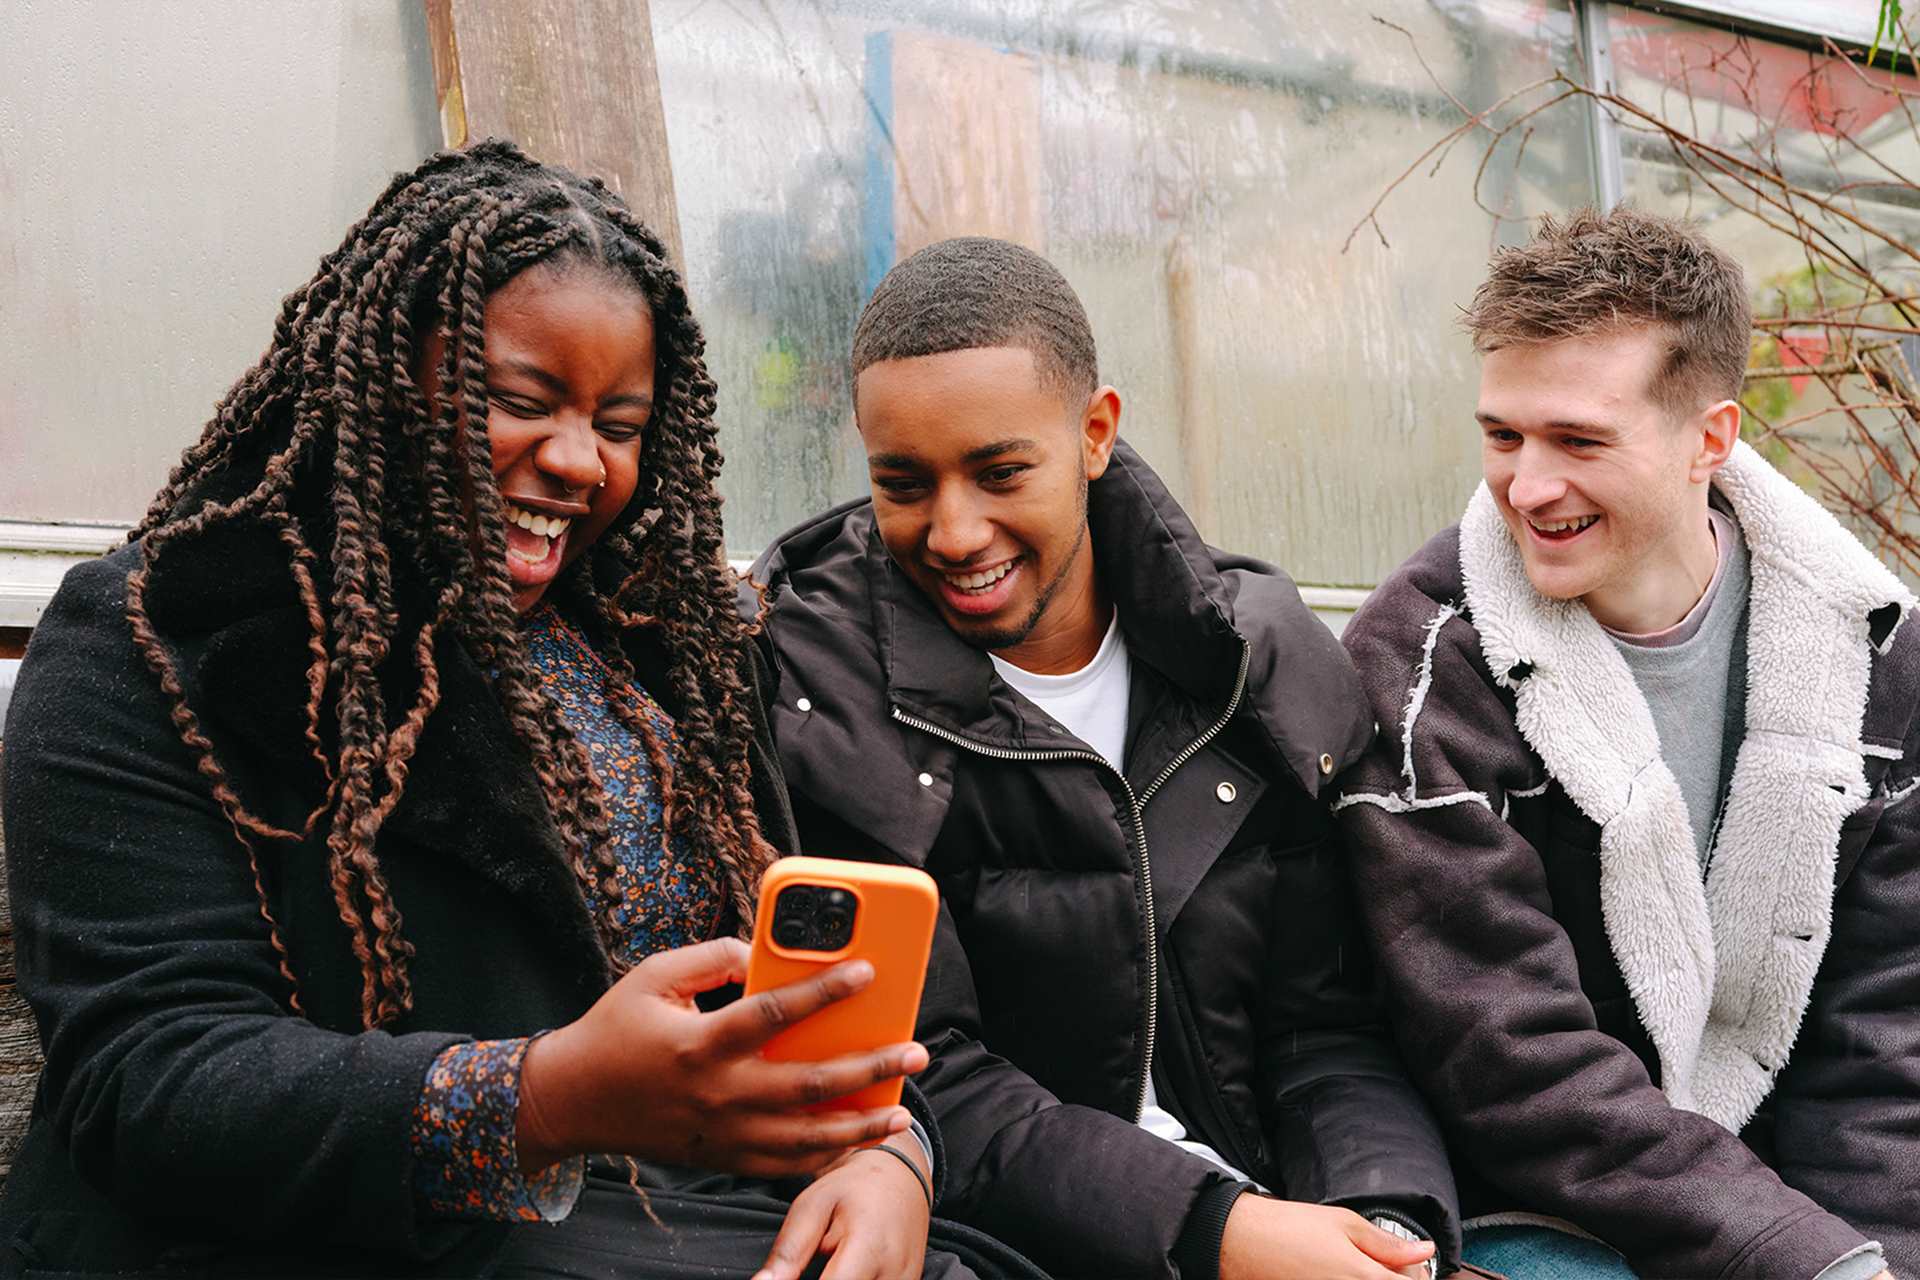 A young Black woman, young Black man and young white man, all sitting on a bench outside, looking at something on a phone and laughing.